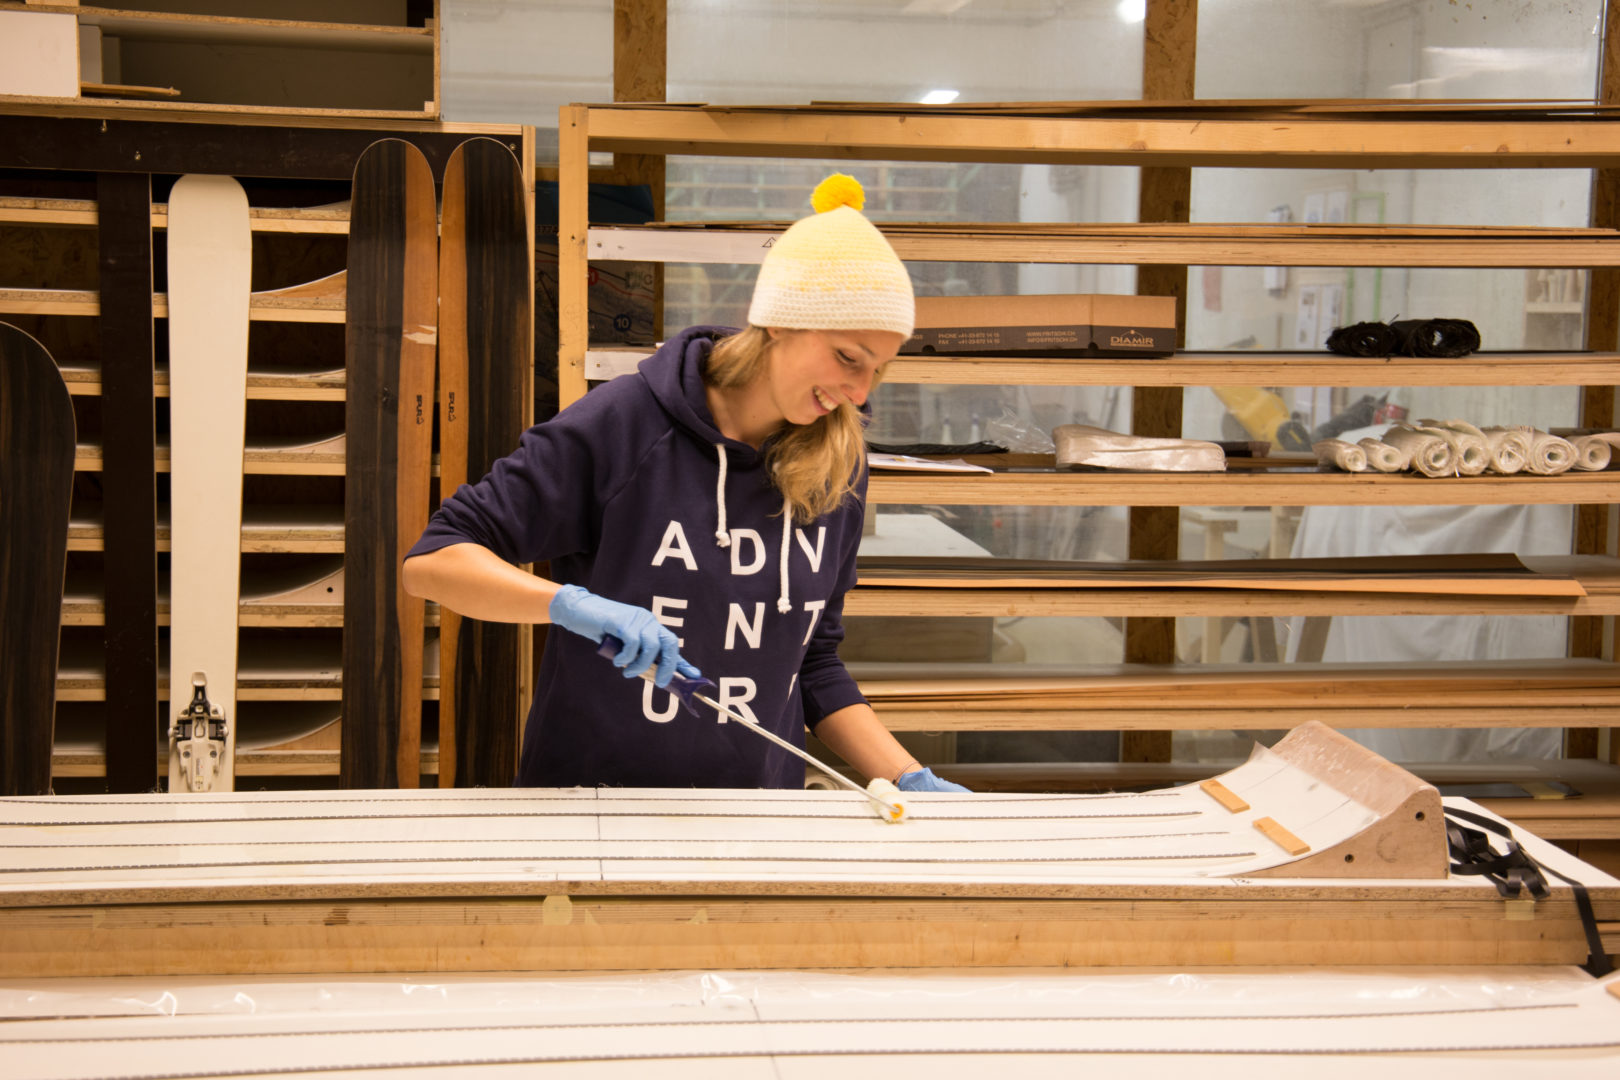 The Art of Building Skis in Austria